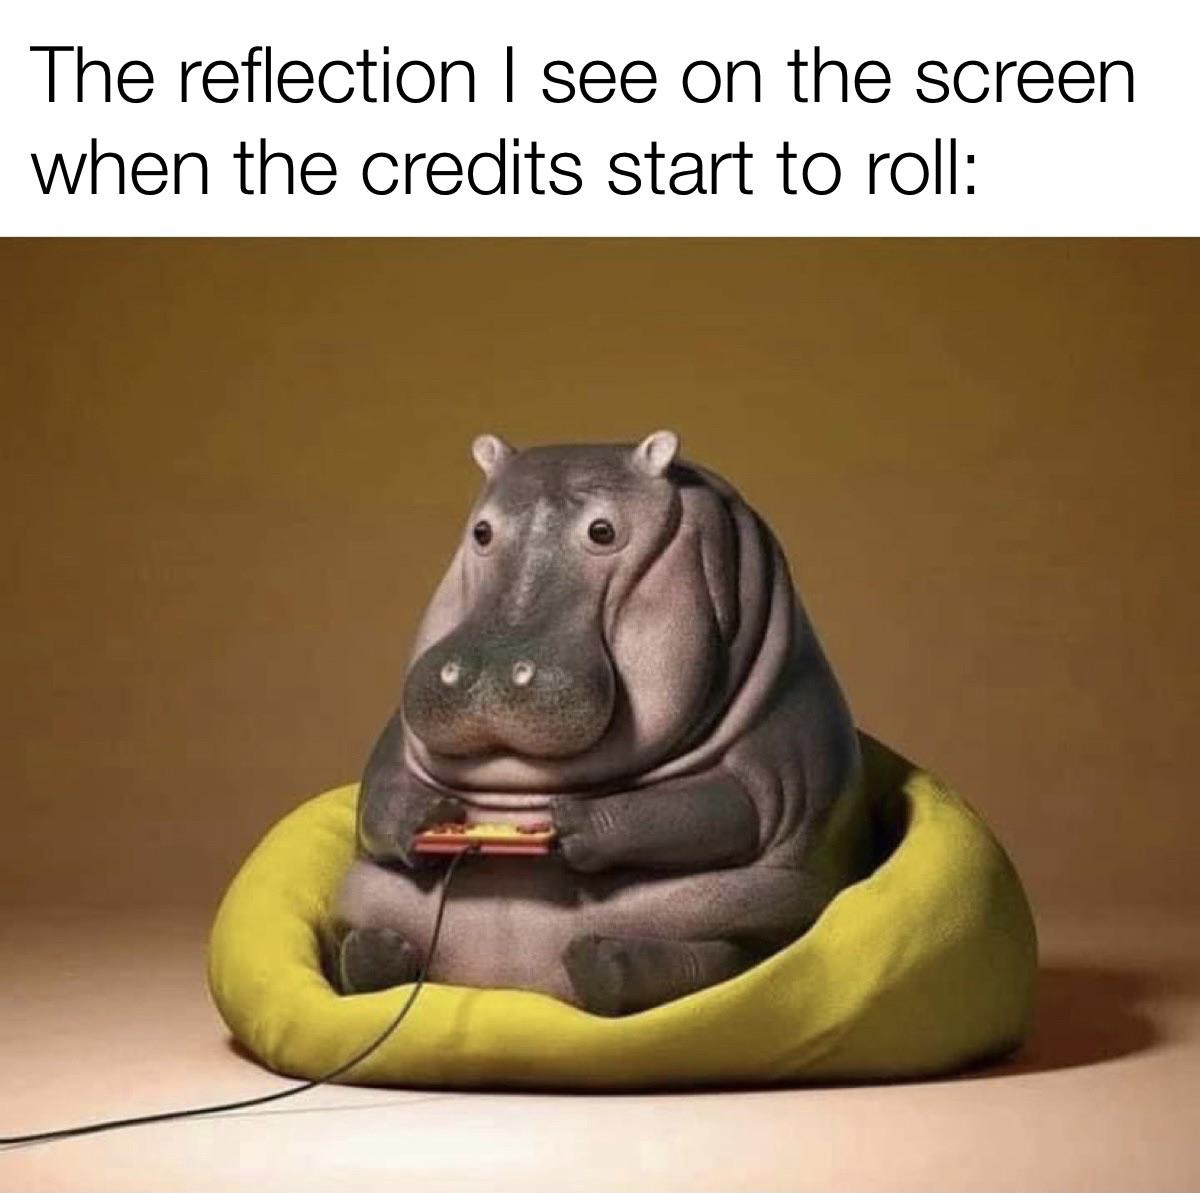 dank memes, funny memes - gamer hippo - The reflection I see on the screen when the credits start to roll